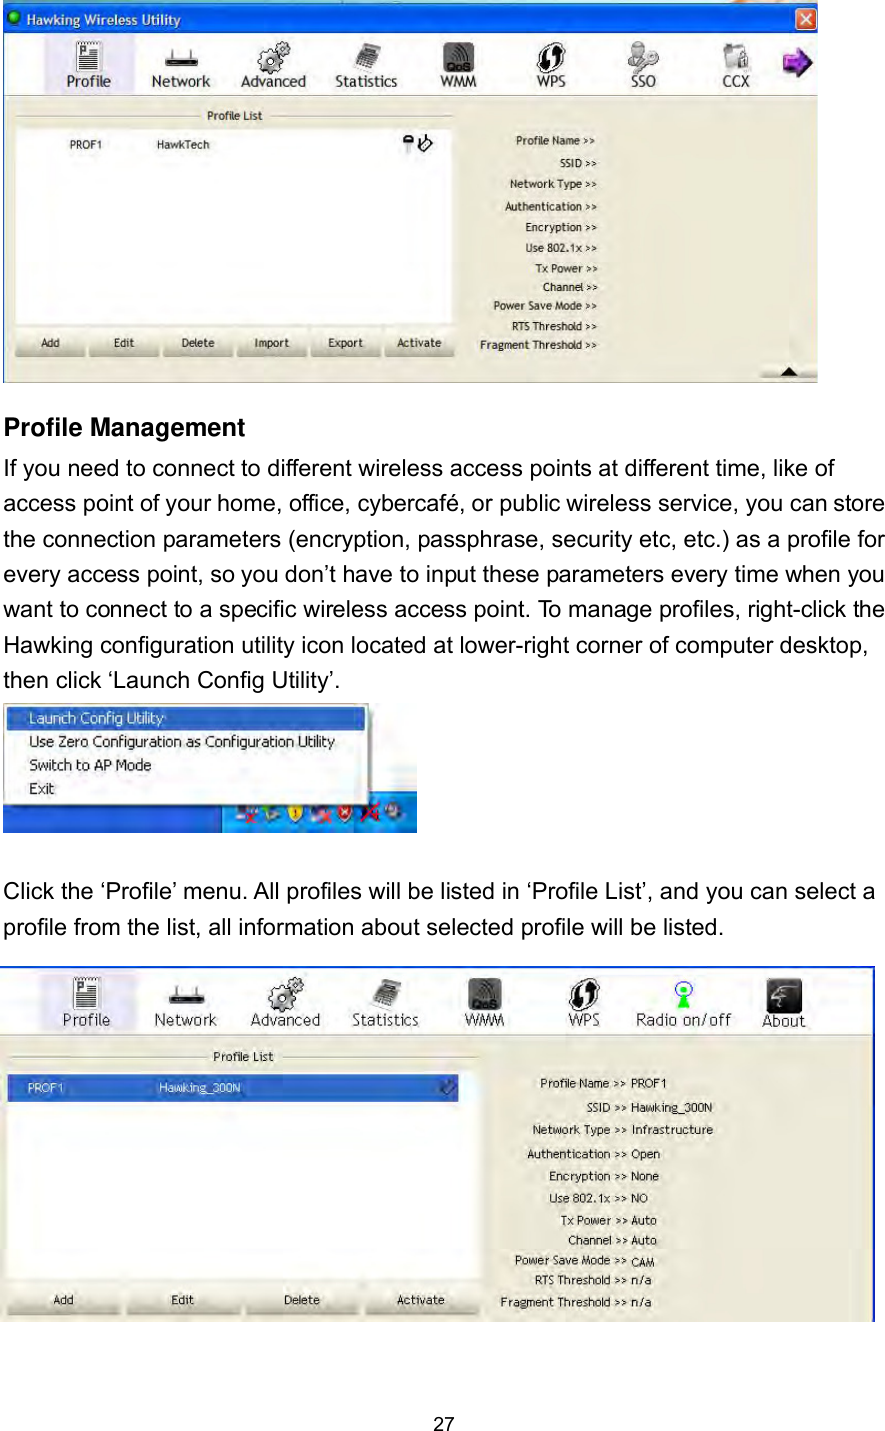  27  Profile Management If you need to connect to different wireless access points at different time, like of access point of your home, office, cybercafé, or public wireless service, you can store the connection parameters (encryption, passphrase, security etc, etc.) as a profile for every access point, so you don’t have to input these parameters every time when you want to connect to a specific wireless access point. To manage profiles, right-click the Hawking configuration utility icon located at lower-right corner of computer desktop, then click ‘Launch Config Utility’.   Click the ‘Profile’ menu. All profiles will be listed in ‘Profile List’, and you can select a profile from the list, all information about selected profile will be listed.              